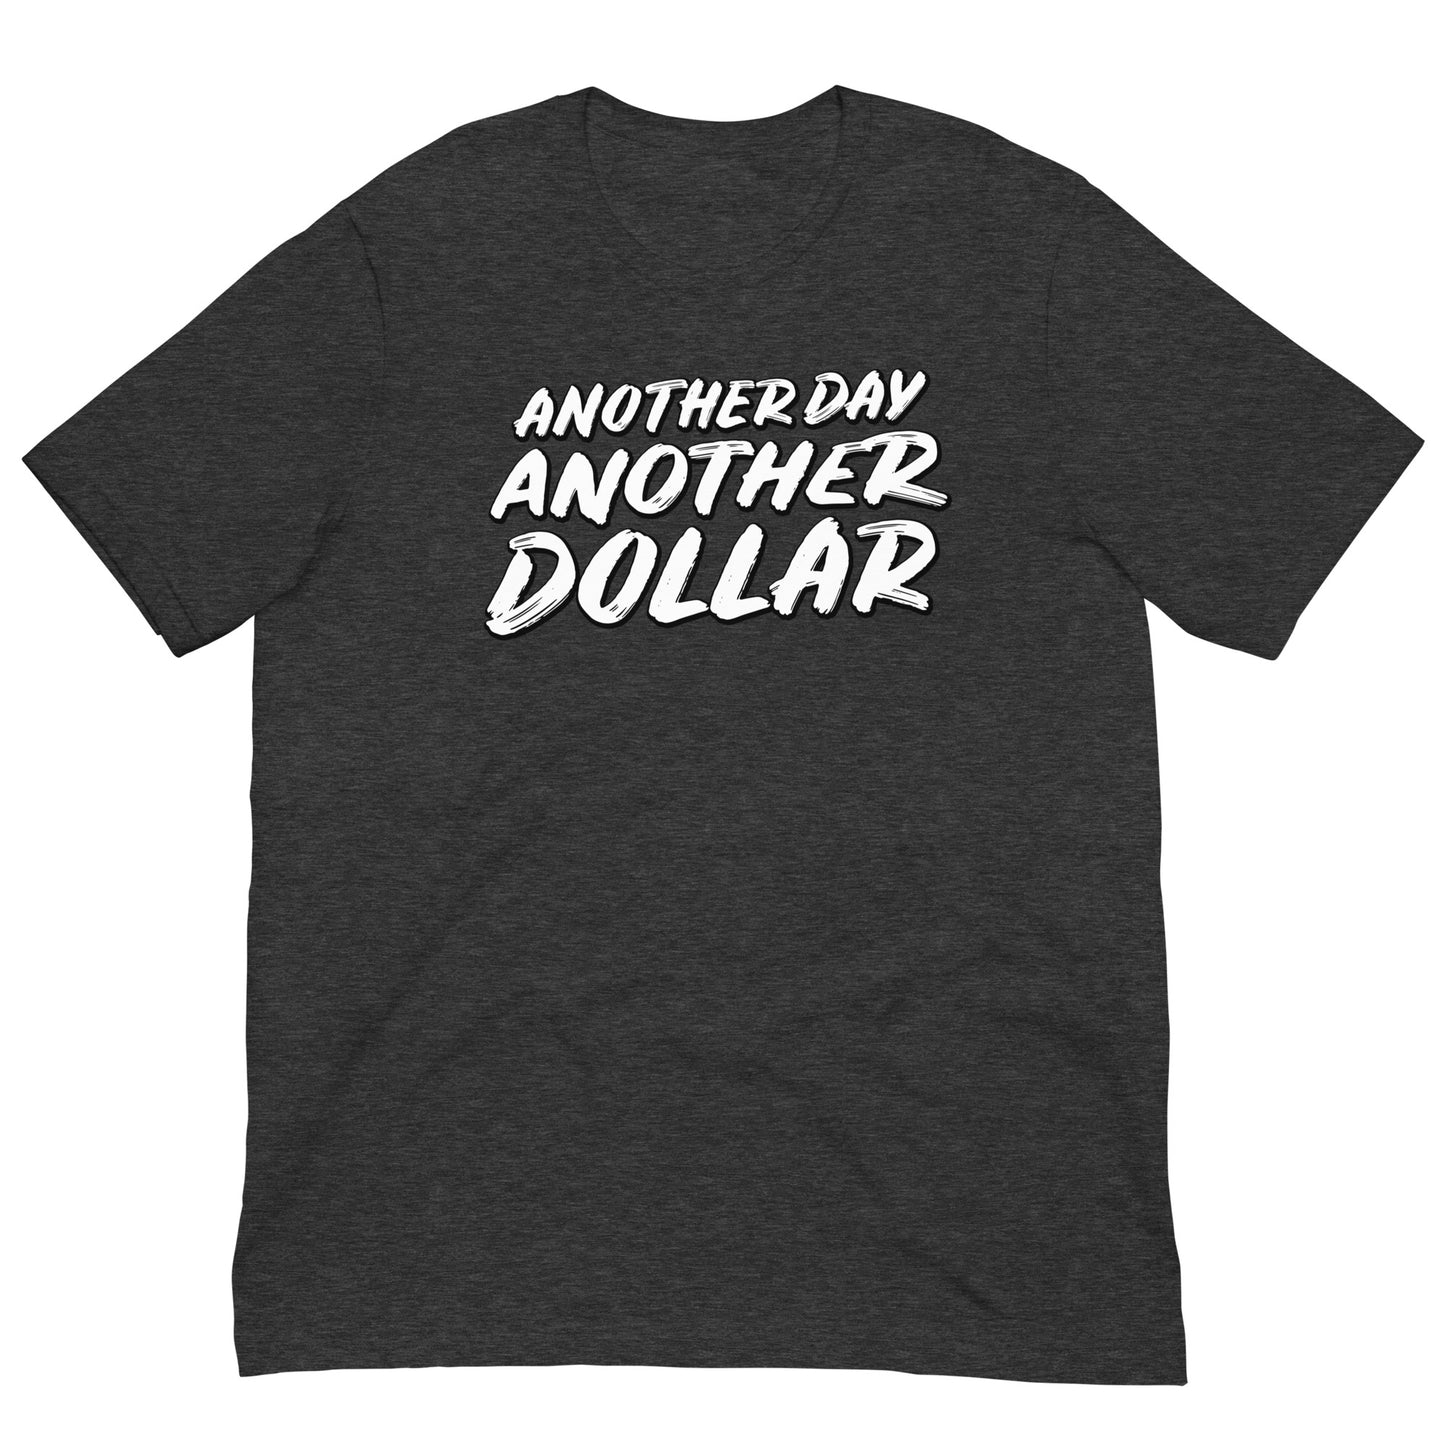 Another Day Another Dollar Tshirt Action Movie Quote Graphic Tee Shirt Bella + Canvas Unisex Short Sleeve T-Shirt